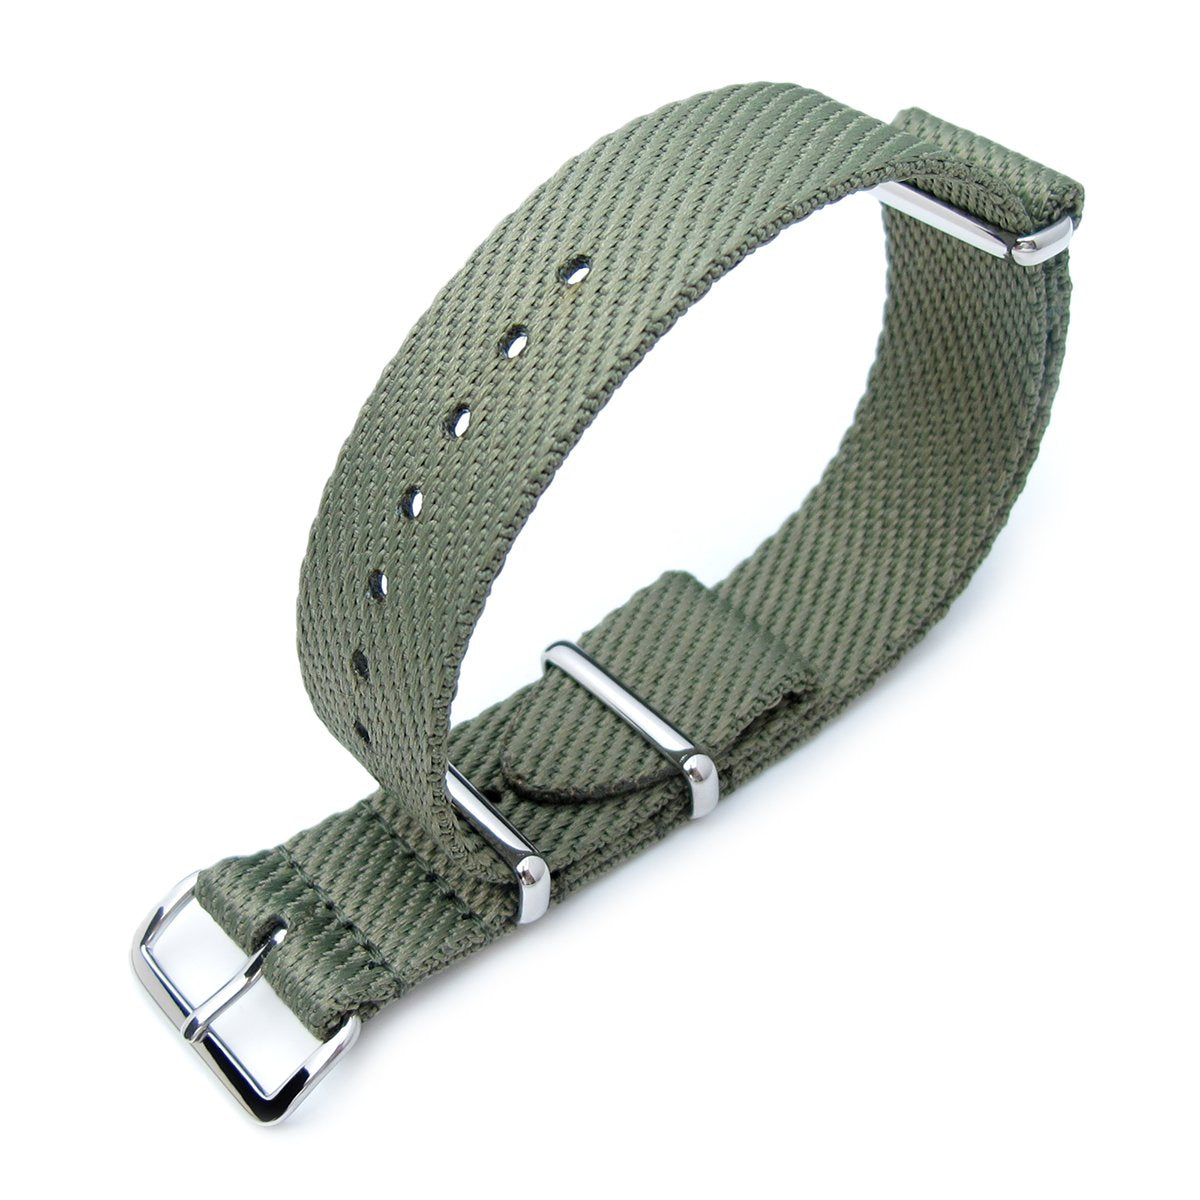 MiLTAT 20mm G10 Military NATO Watch Strap Waffle Nylon Armband Polished Military Green Strapcode Watch Bands